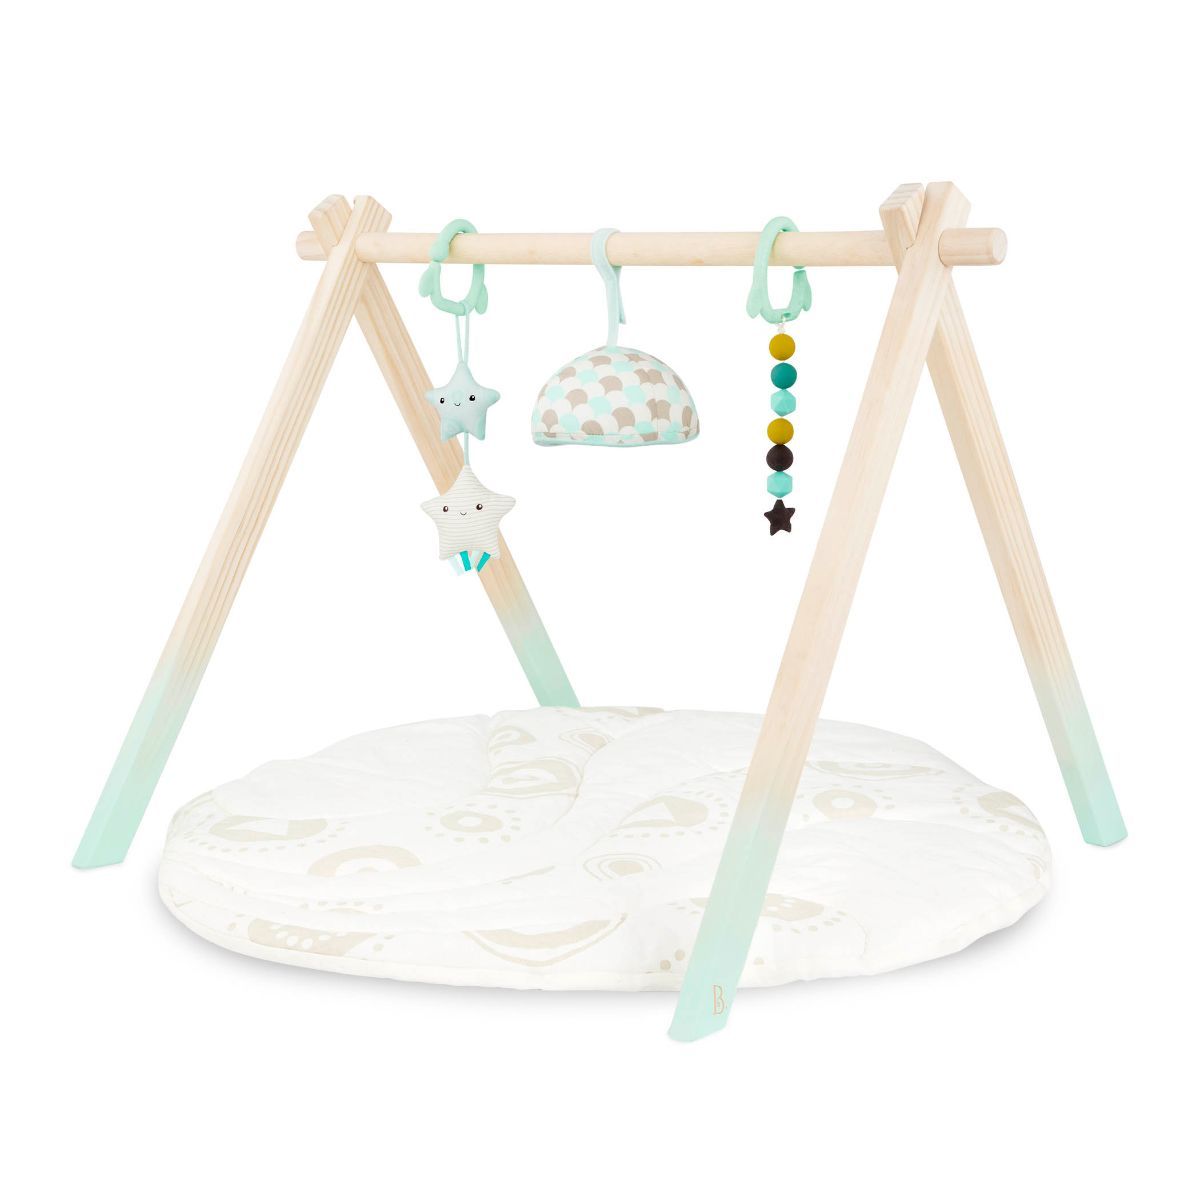 Starry Sky, Wooden Play Gym